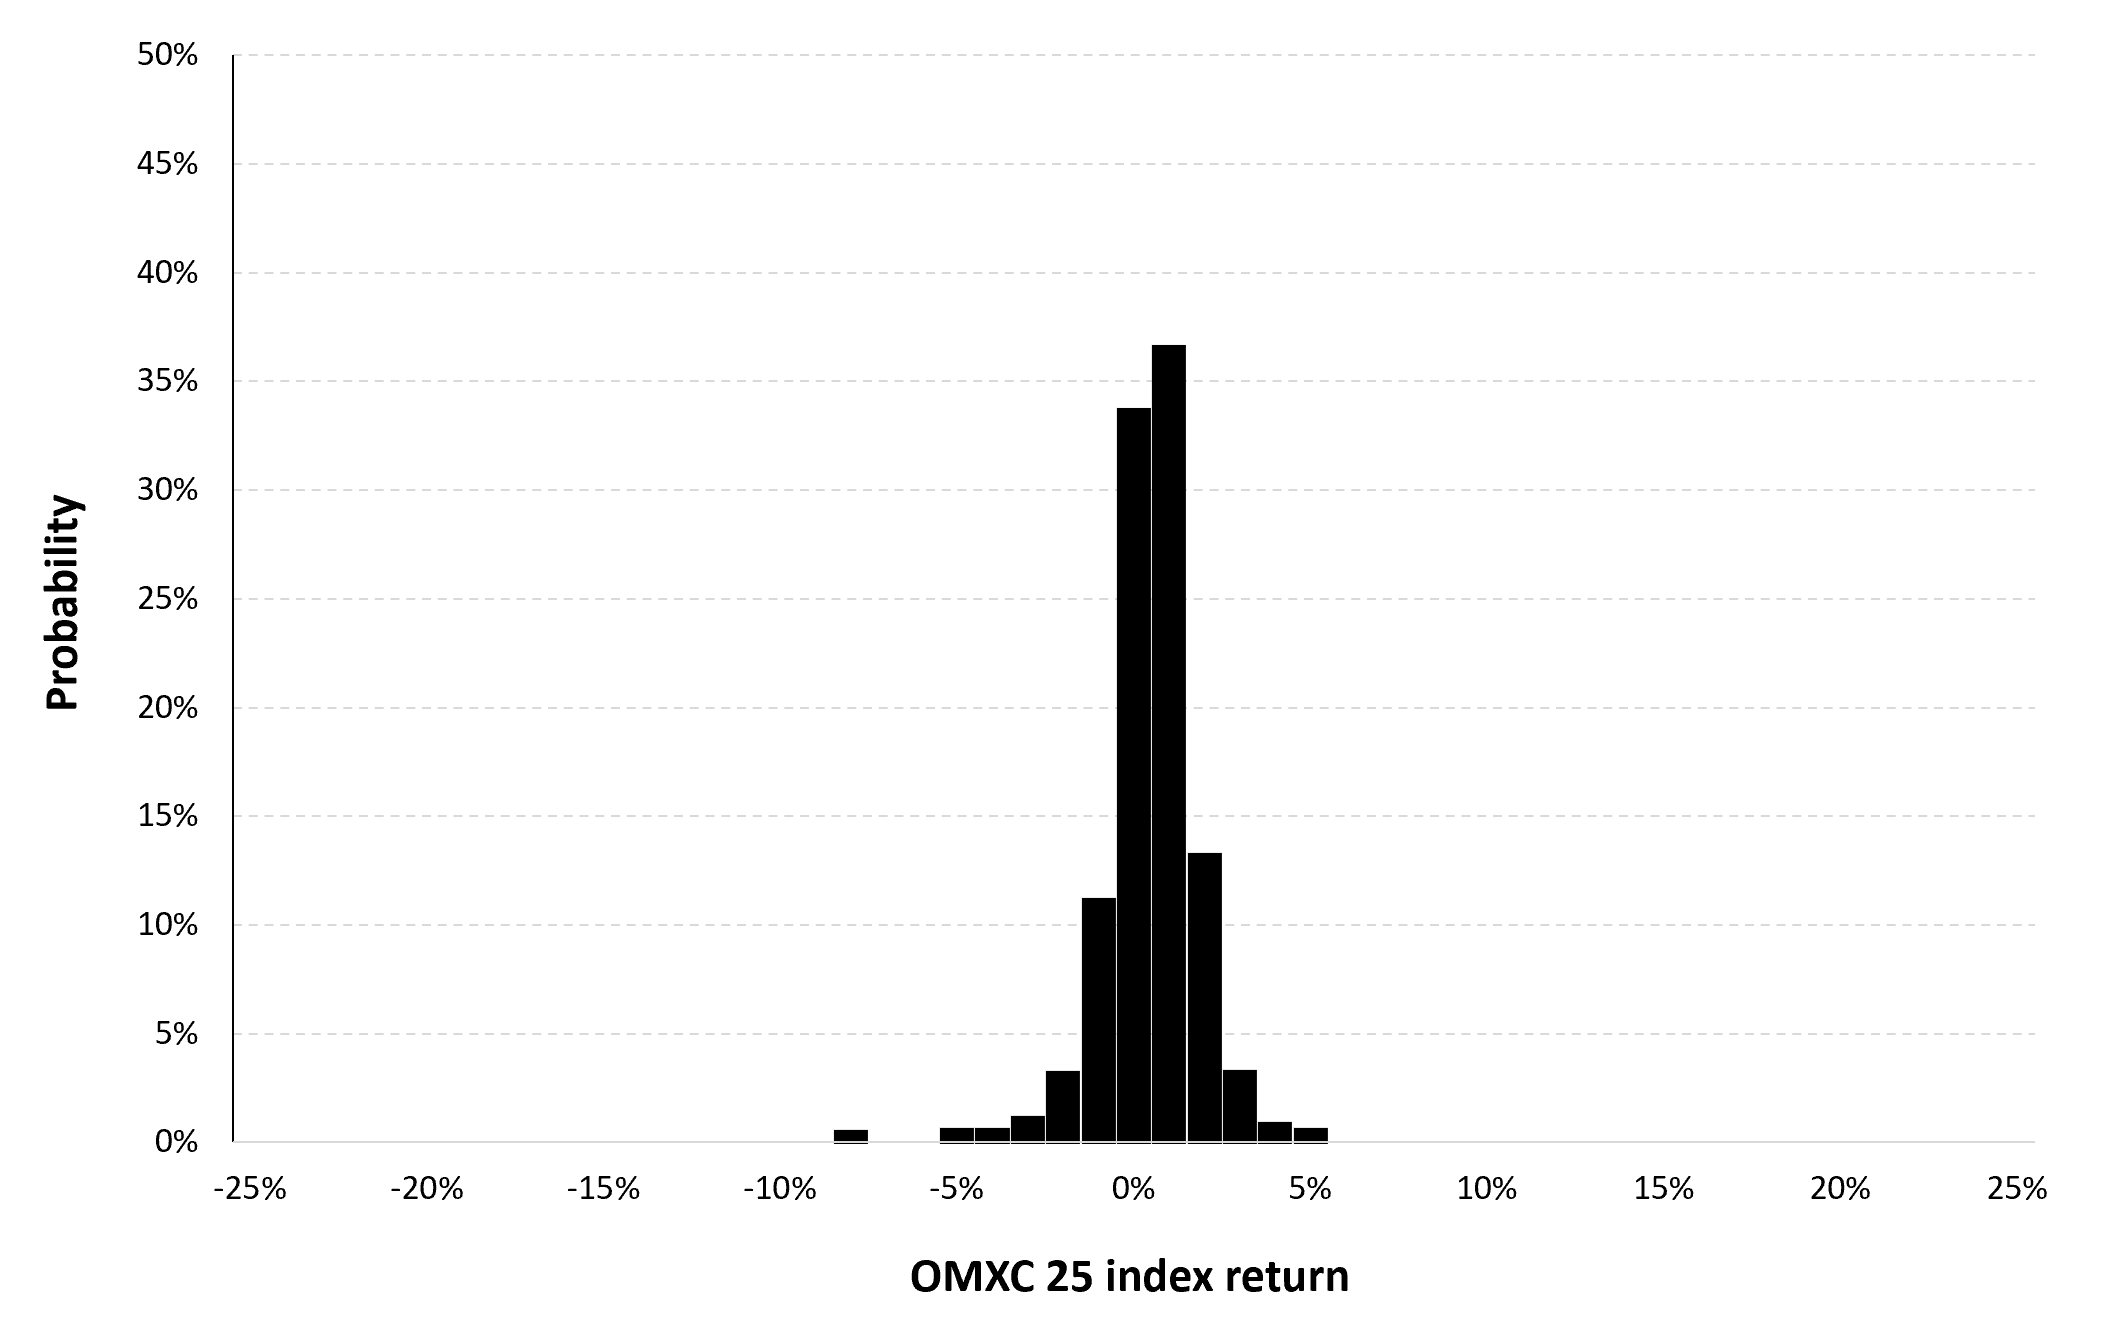 Historical distribution of the daily OMXC 25 index returns